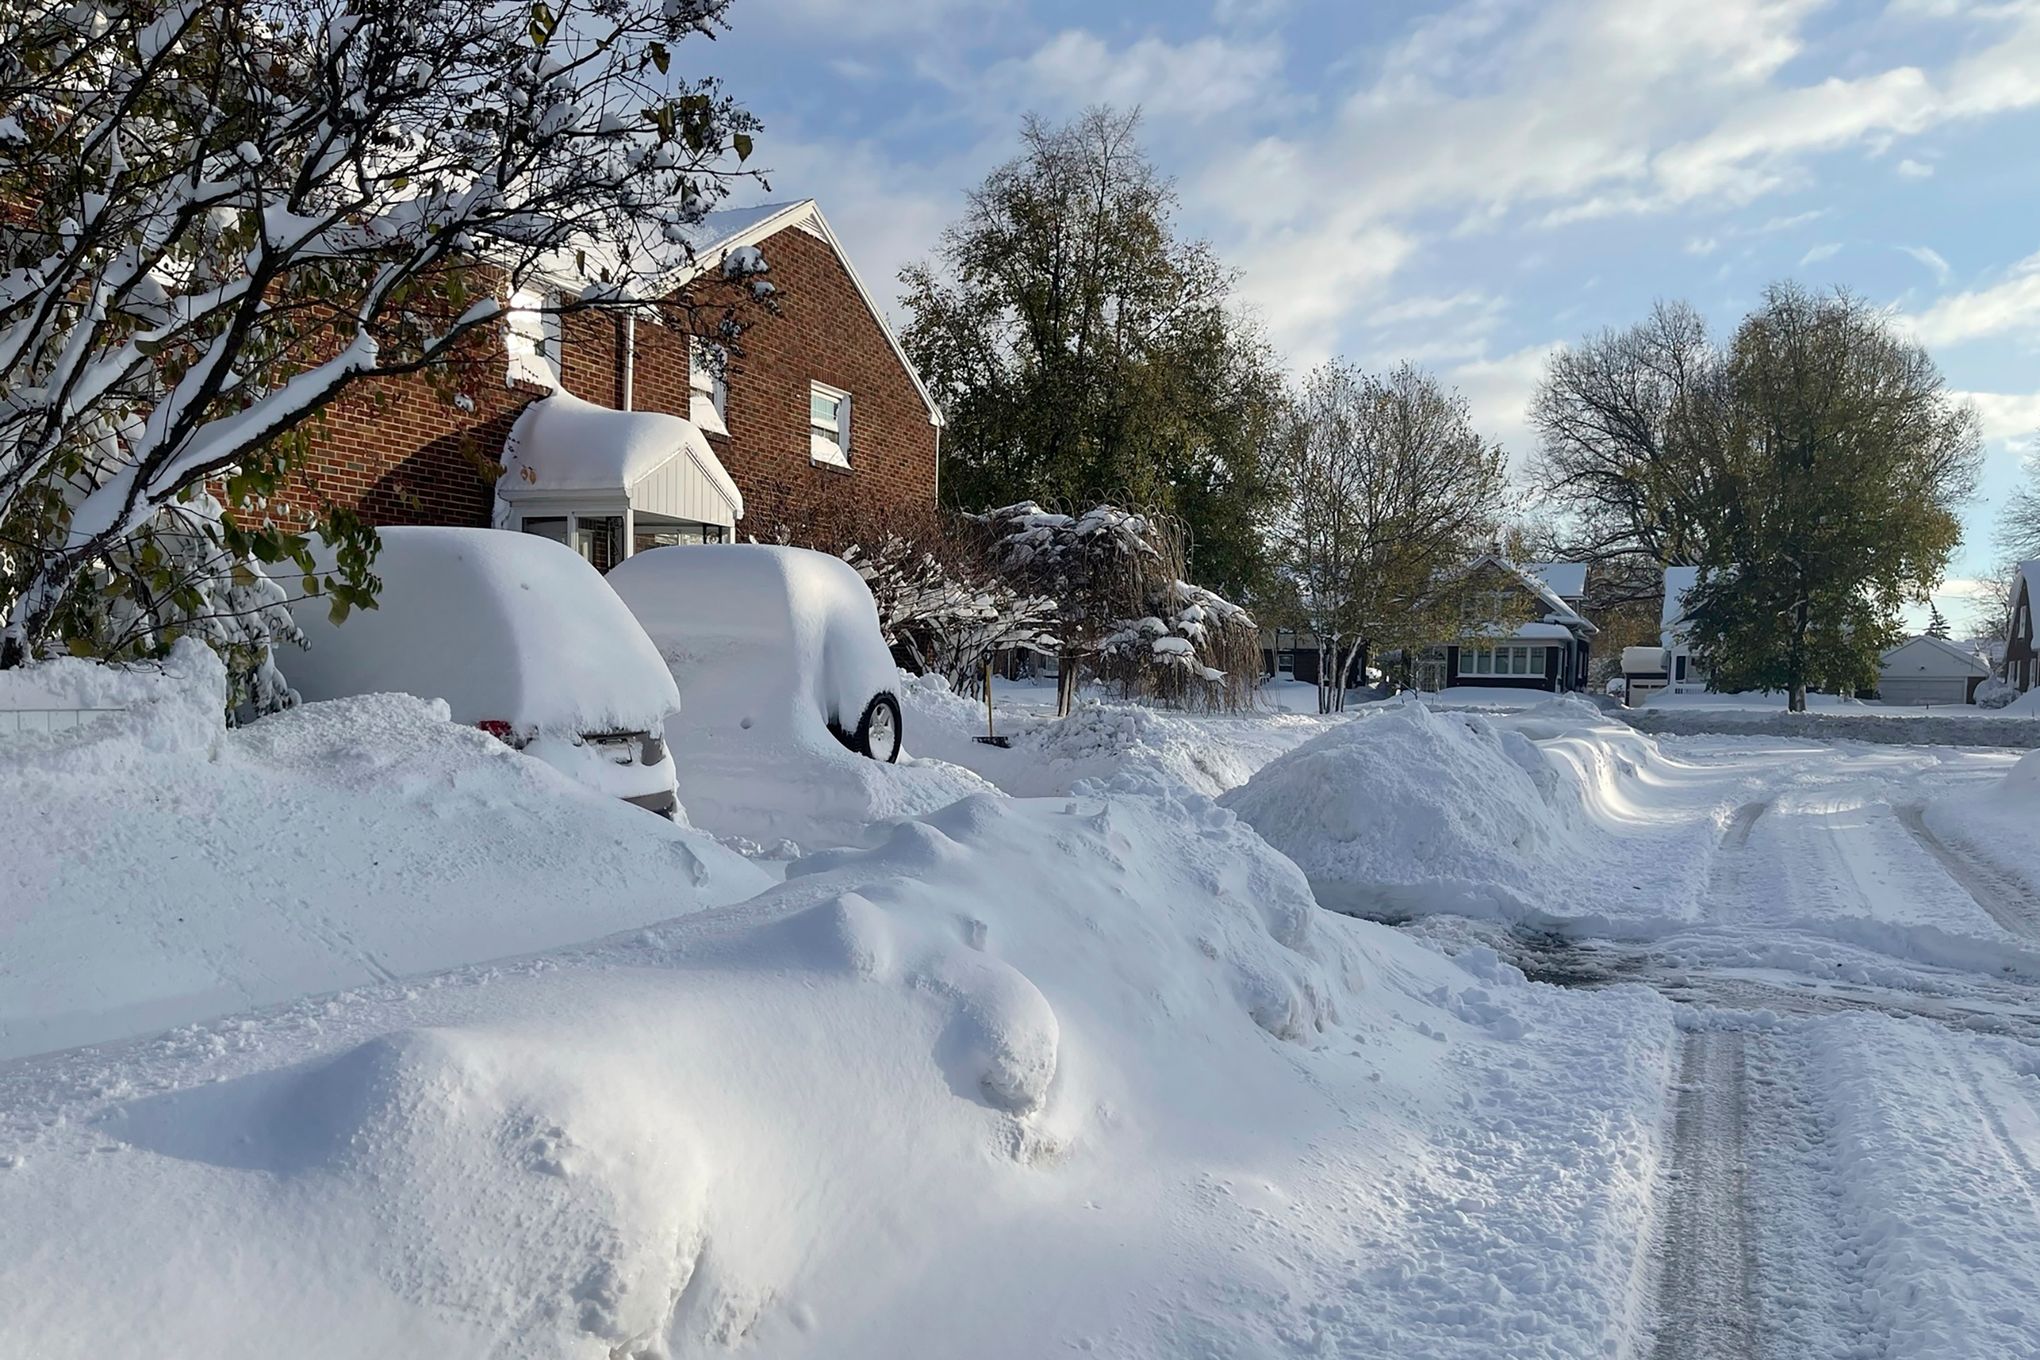 Lake-effect snow buries portions of Buffalo, Great Lakes under feet of snow